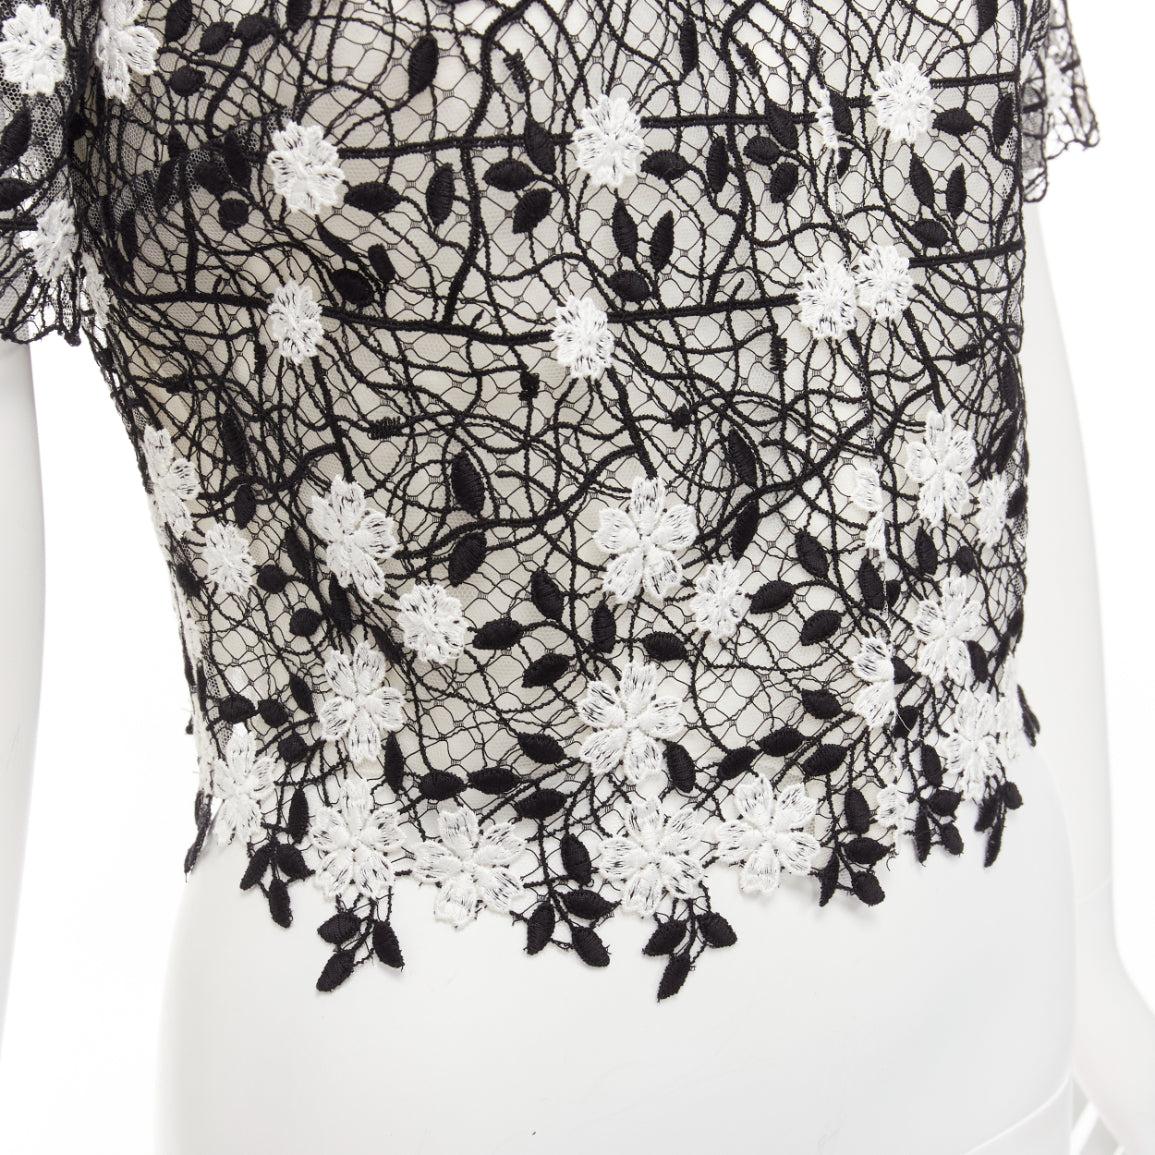 GIAMBATTISTA VALLI black cotton blend lace pink applique cropped shirt IT38 XS
Reference: LNKO/A02303
Brand: Giambattista Valli
Material: Cotton, Blend
Color: Black, Pink
Pattern: Lace
Closure: Snap Buttons
Lining: White Fabric
Made in: